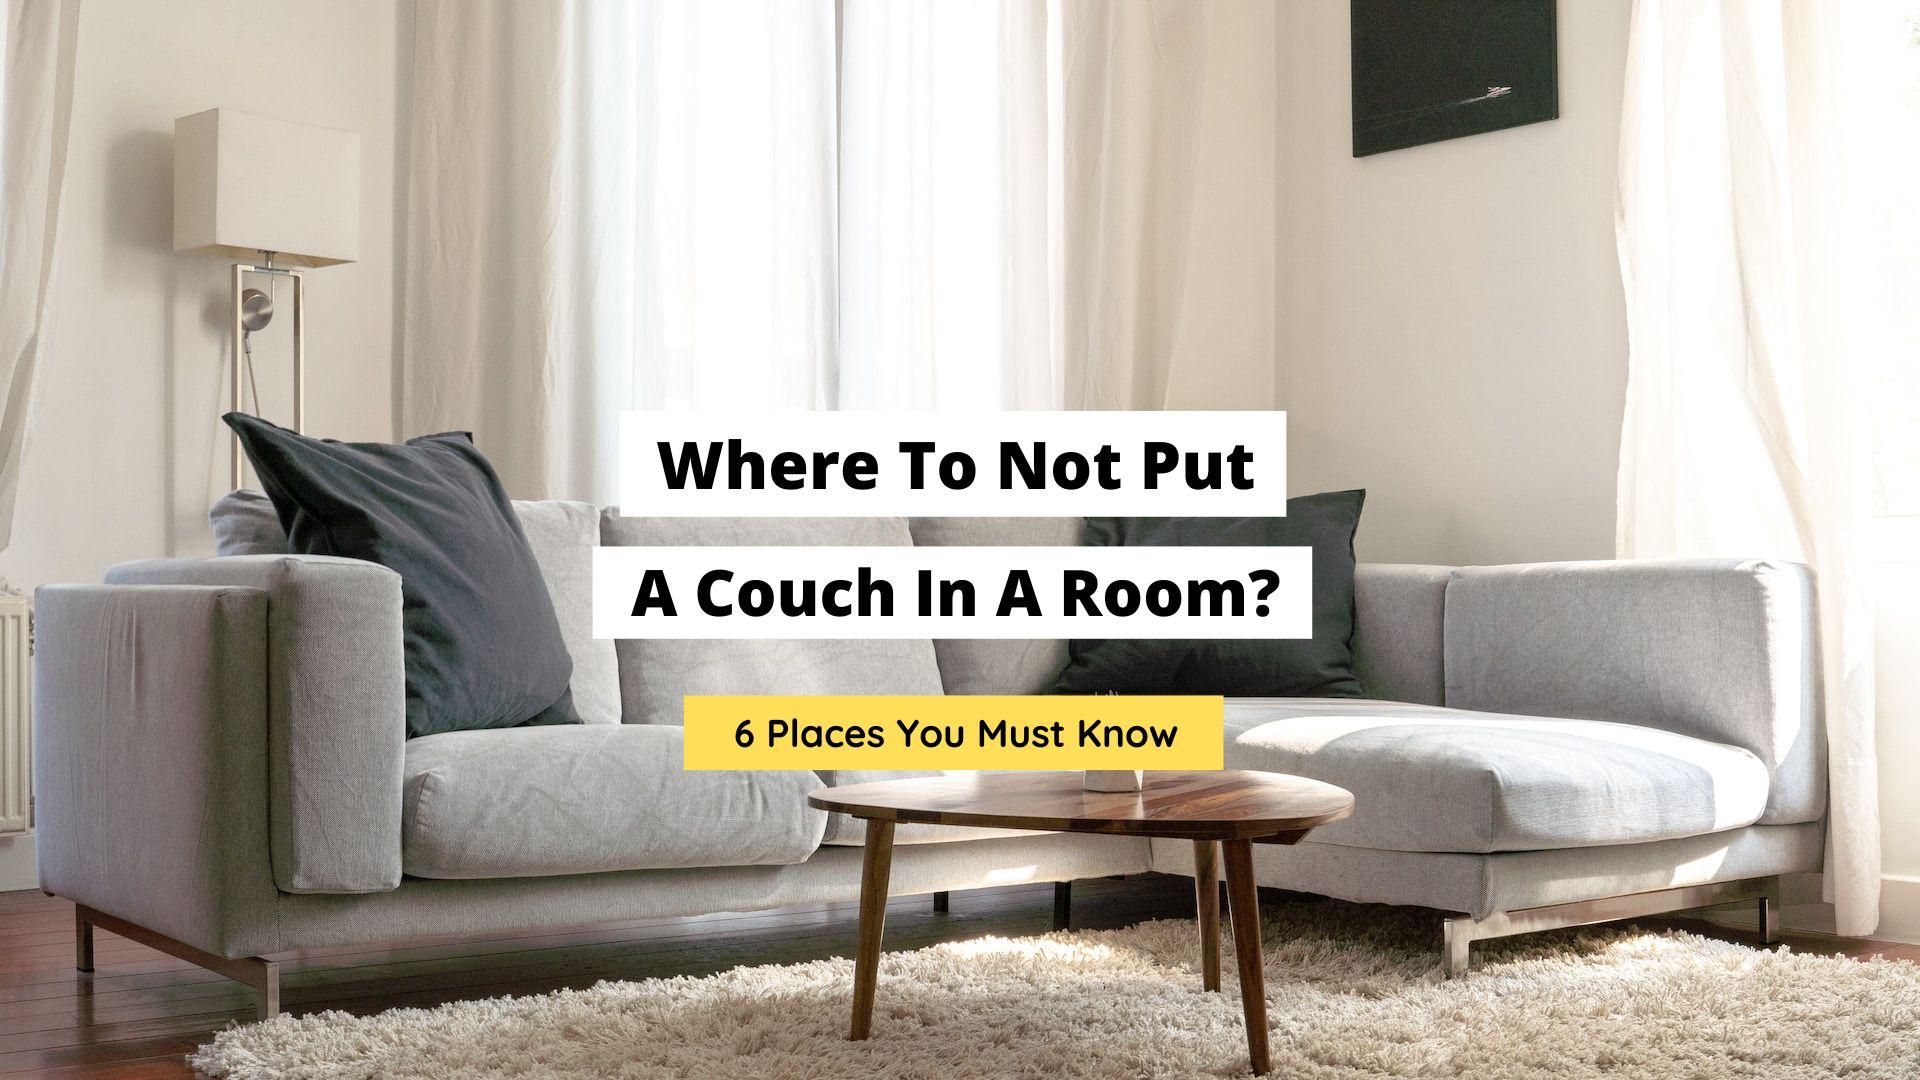 Where To Not Put A Couch In A Room